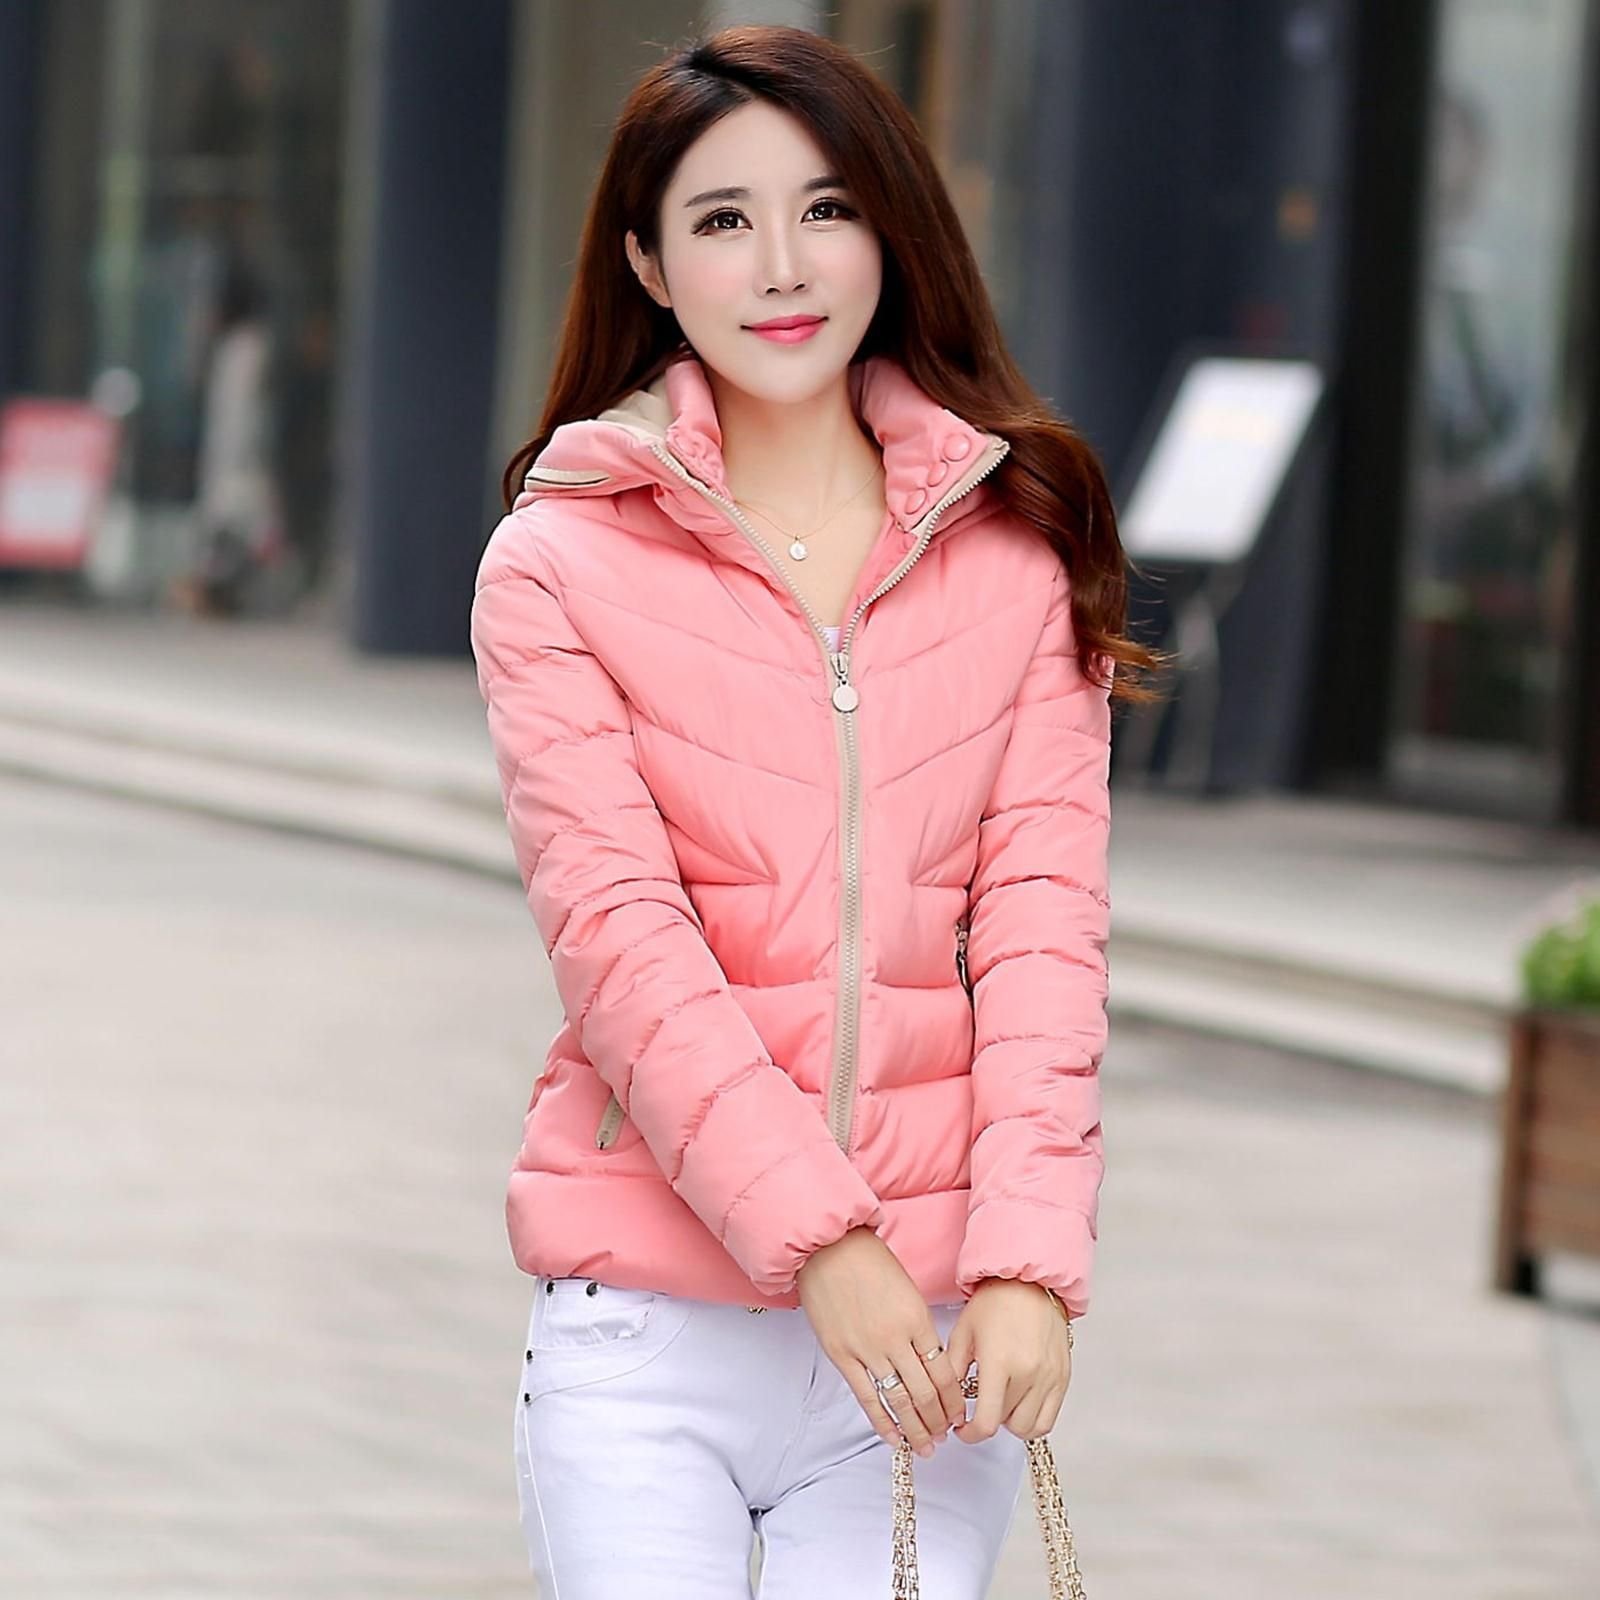 Fashionable womens jackets spring autumn » Wallpapers and Images